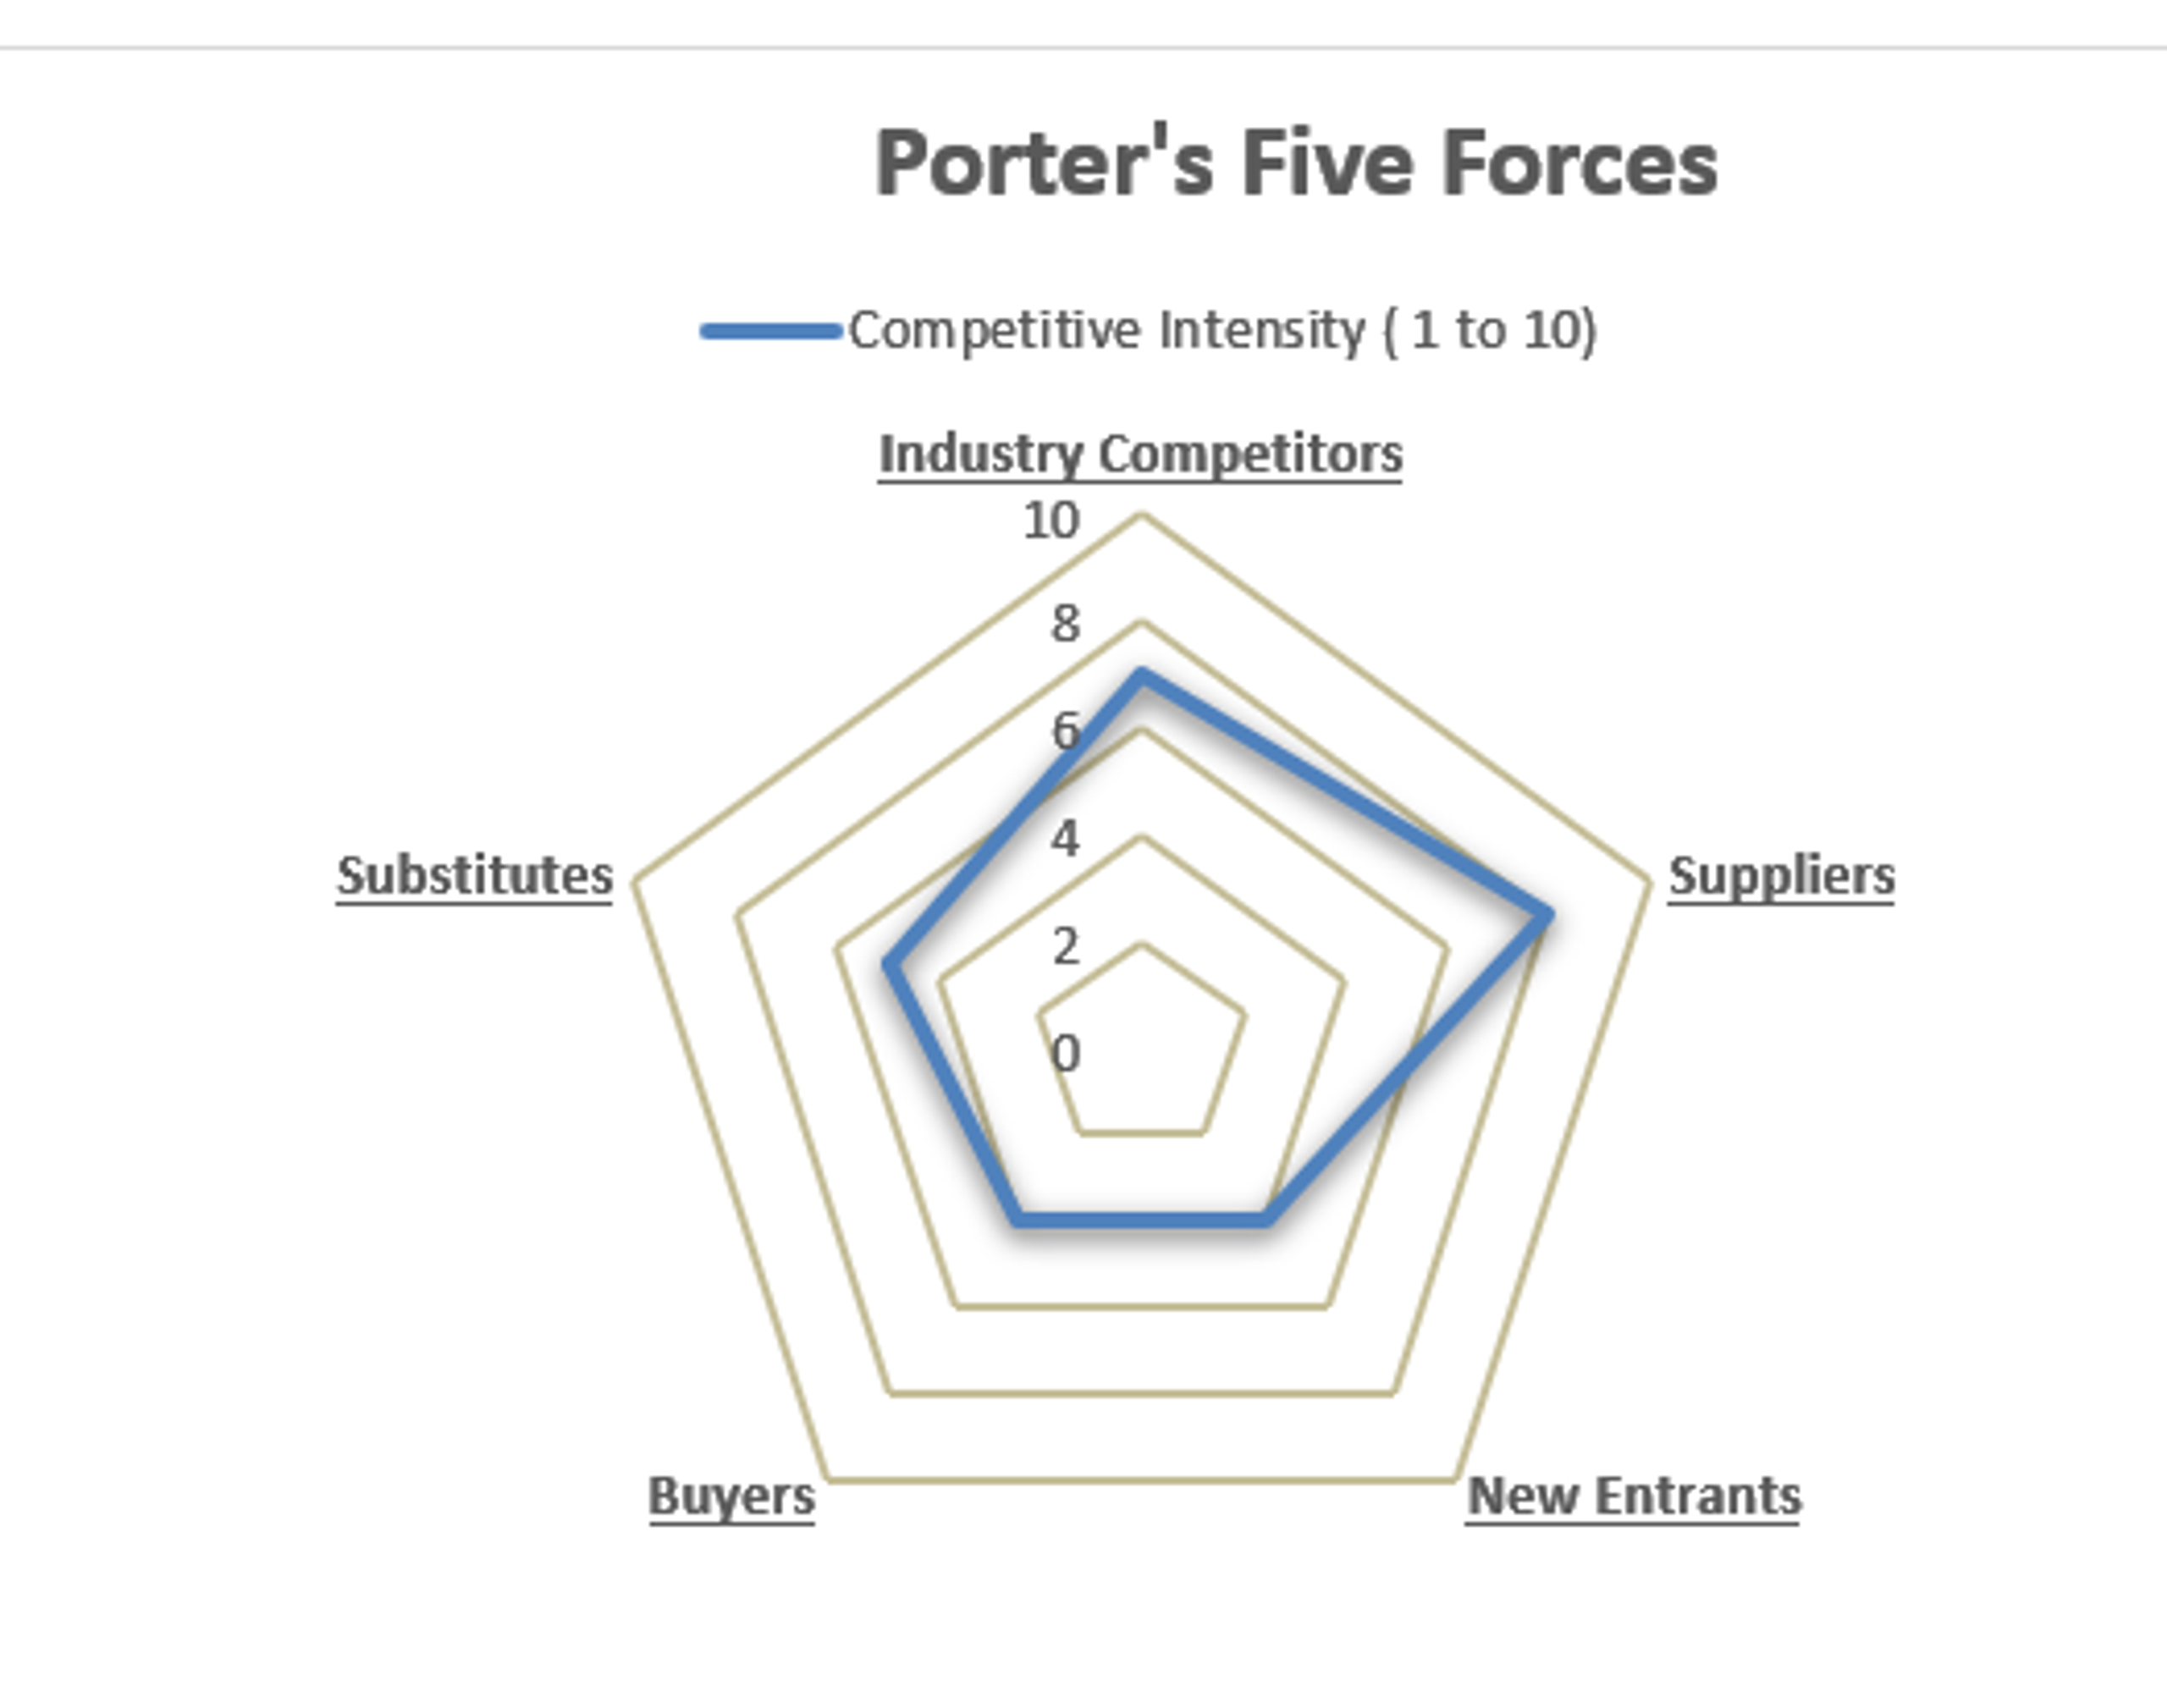 porters-five-competitive-forces-ms-word-template